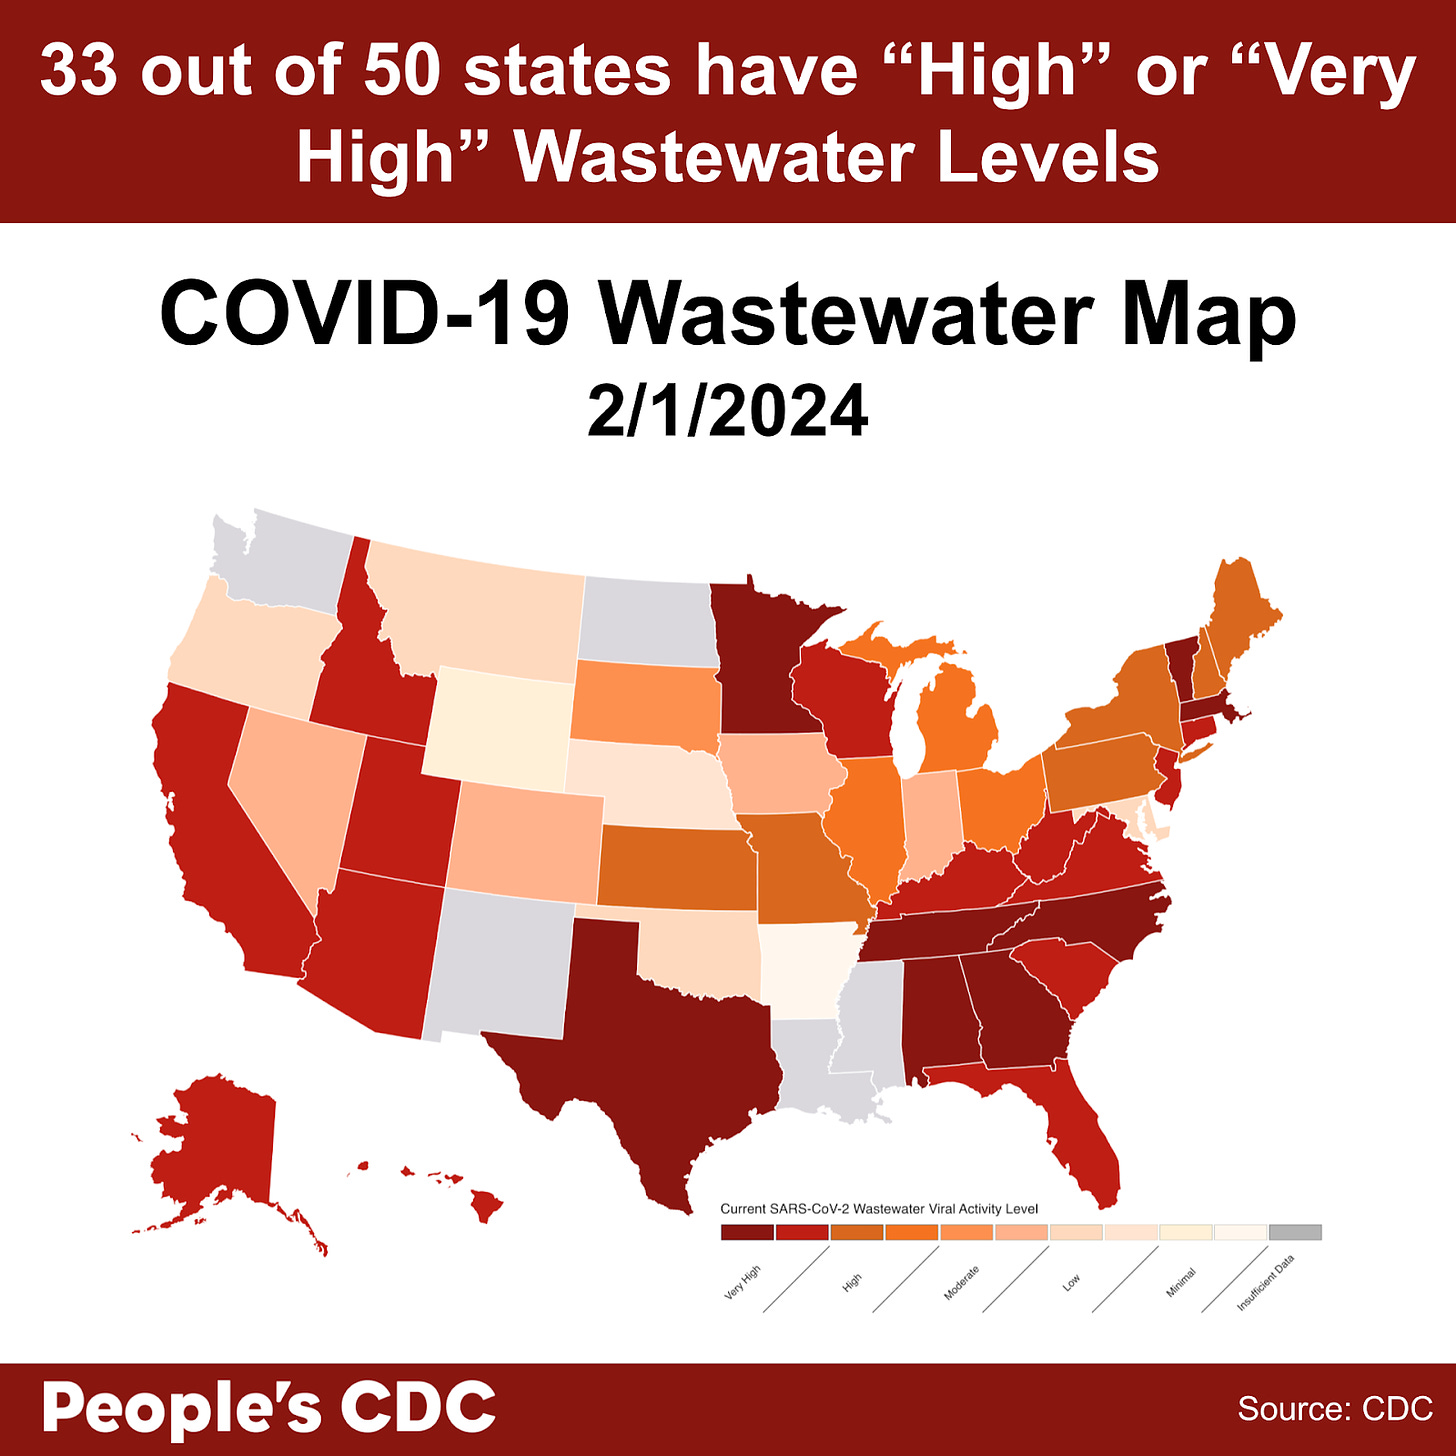 A map of the United States color coded in shades of red, orange, and gray displaying Current SARS-CoV-2 Wastewater Viral Activity level, where deeper tones correlate to higher viral activity and gray indicates insufficient data. Most states display a deep red “very high” to orange “high” COVID-19 levels with 5 states, the U.S. Virgin Islands, Puerto Rico, Guam and Washington D.C. reporting insufficient data. Text on map reads “33 out of 54 states and territories have High or Very High Wastewater Levels. Covid-19 Wastewater Map 2/1/2024. People’s CDC. Source: CDC.”